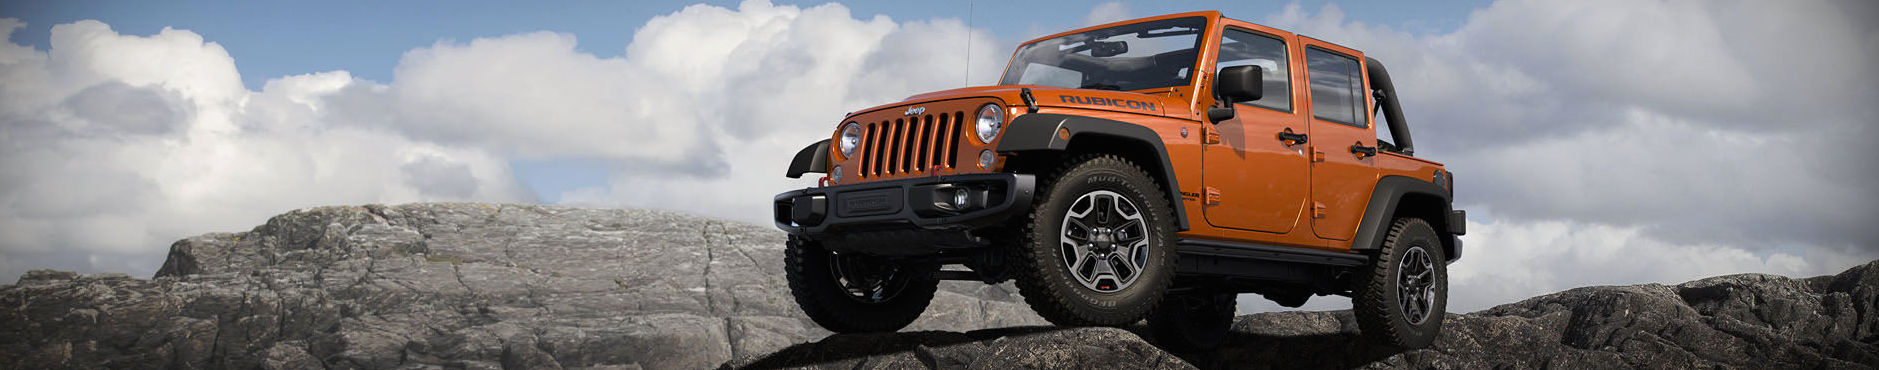 Jeep wrangler lease payments #4